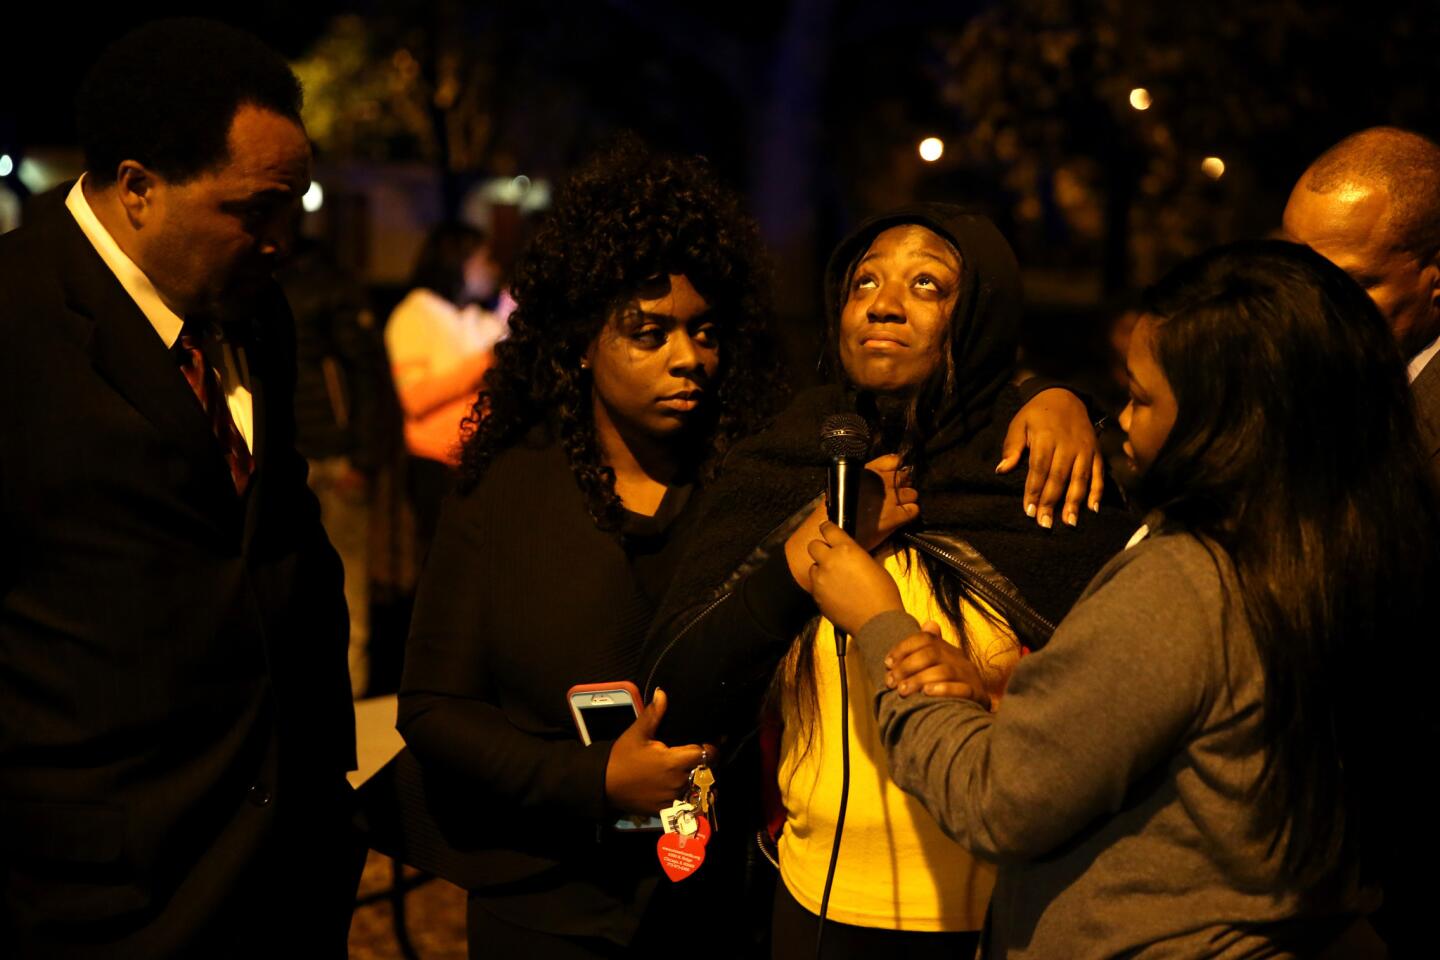 Karla Lee, center, speaks to Auburn Gresham community residents at an Operation: Wake Up! event put on by the Chicago Police Department in the 8000 block of South Damen Avenue on Nov. 3, 2015. Lee's son, Tyshawn Lee, 9, was shot and killed in a nearby alley on Nov. 2.